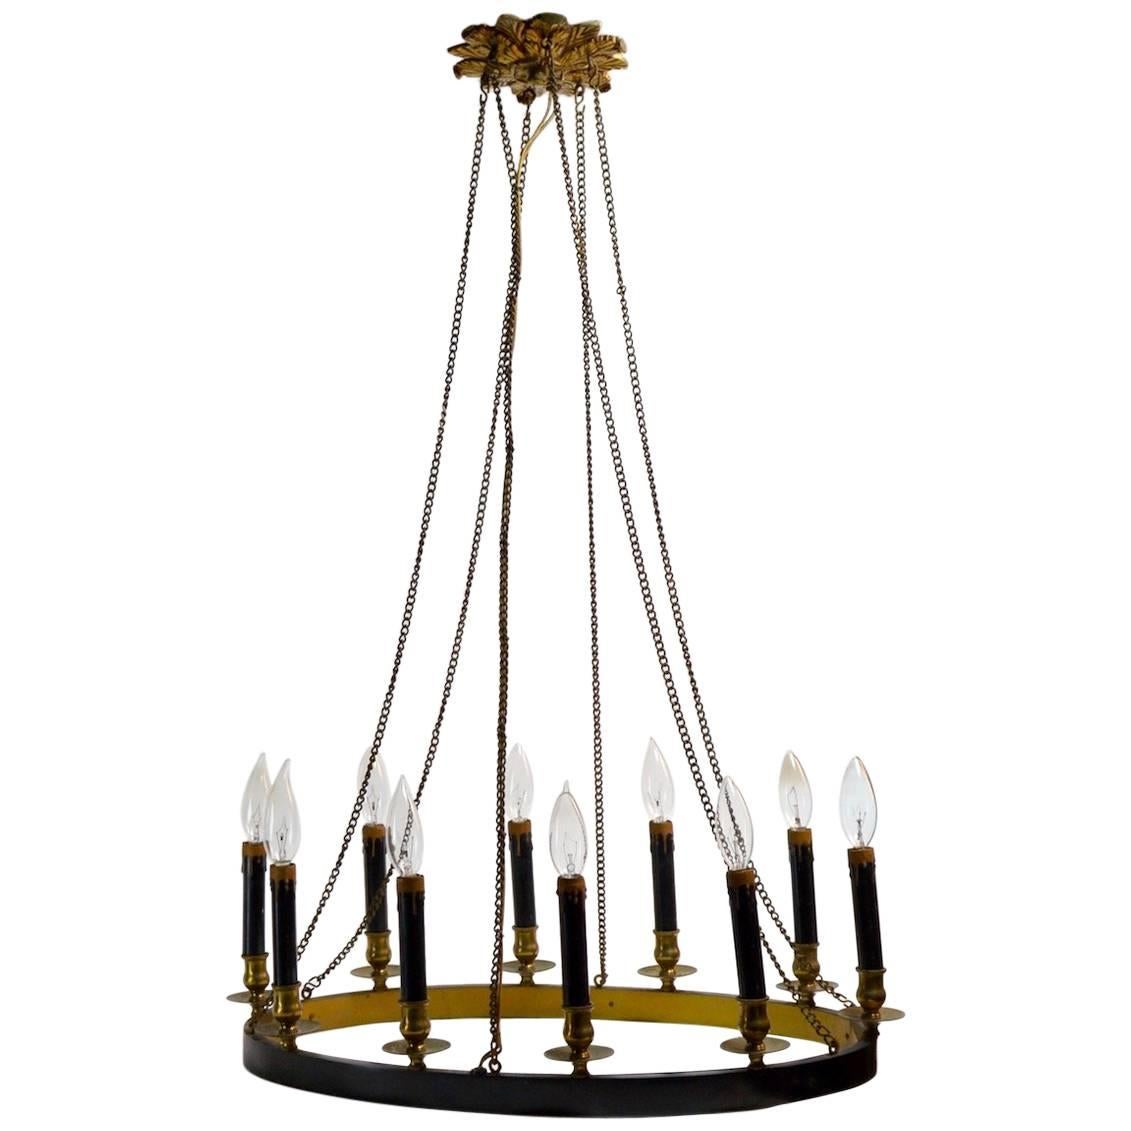 Classical Oval Ring Chandelier Brass and Blackened Metal Ten-Light Fixture